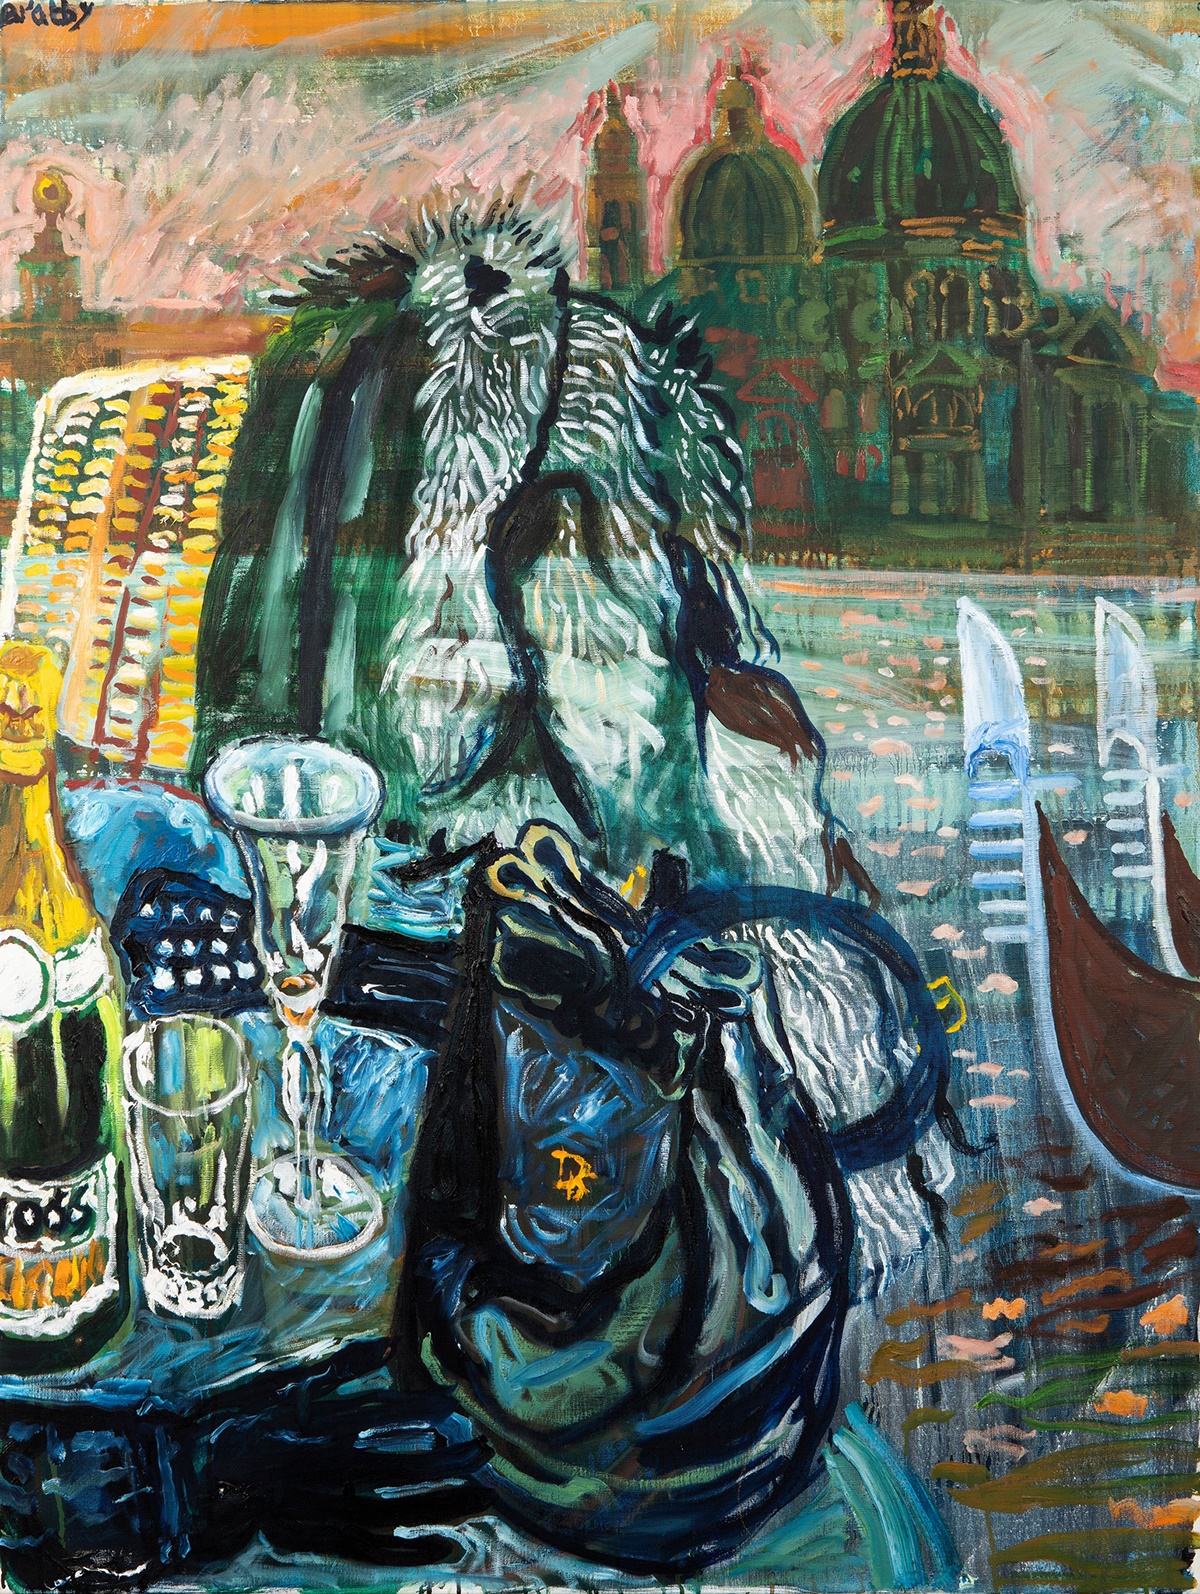 LOT 149 | § JOHN BRATBY (BRITISH 1928-1992) | FROM THE TERRACE, GRITTI PALACE, VENICE | £3,000 - £4,000 + fees